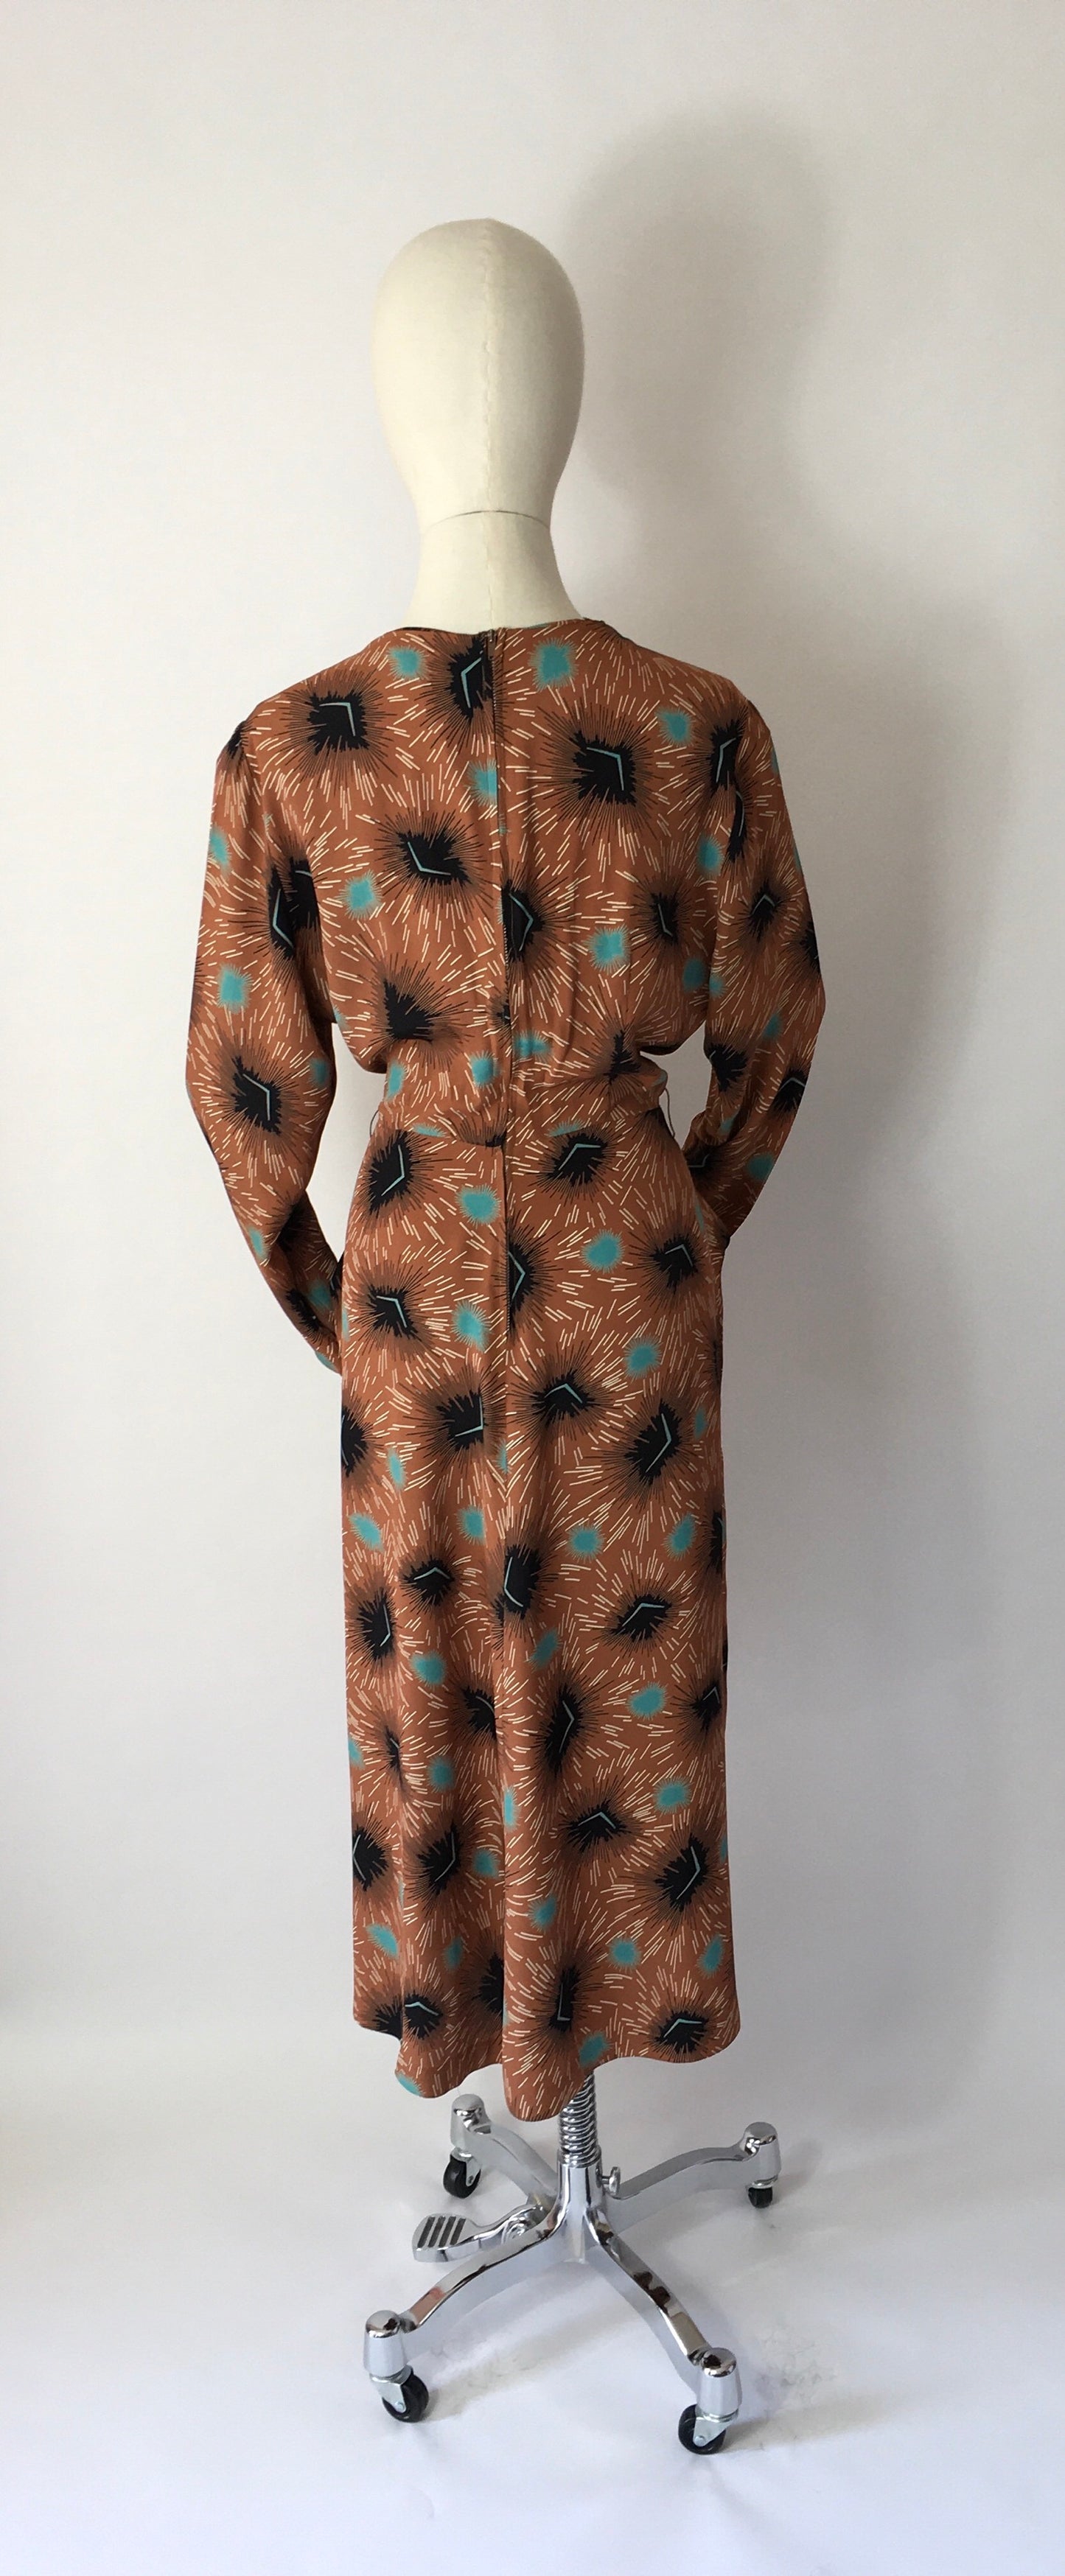 Original 1940’s Stunning Rayon Dress - Featuring a classic Silhouette and Beautiful Colour Pallet